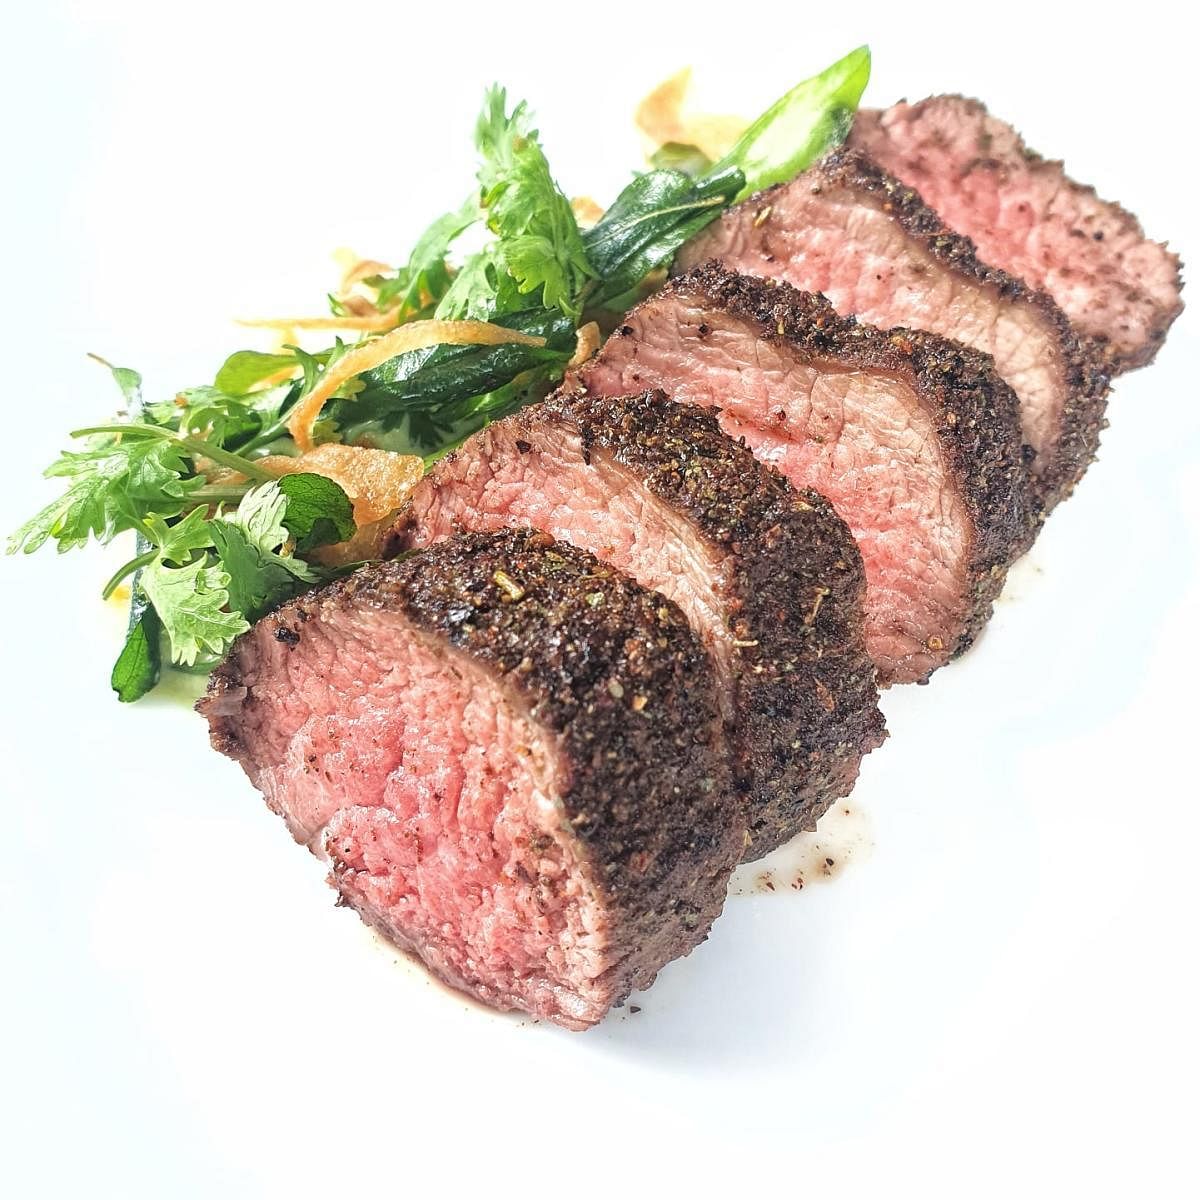 Wattle seed crusted barbecued lamb